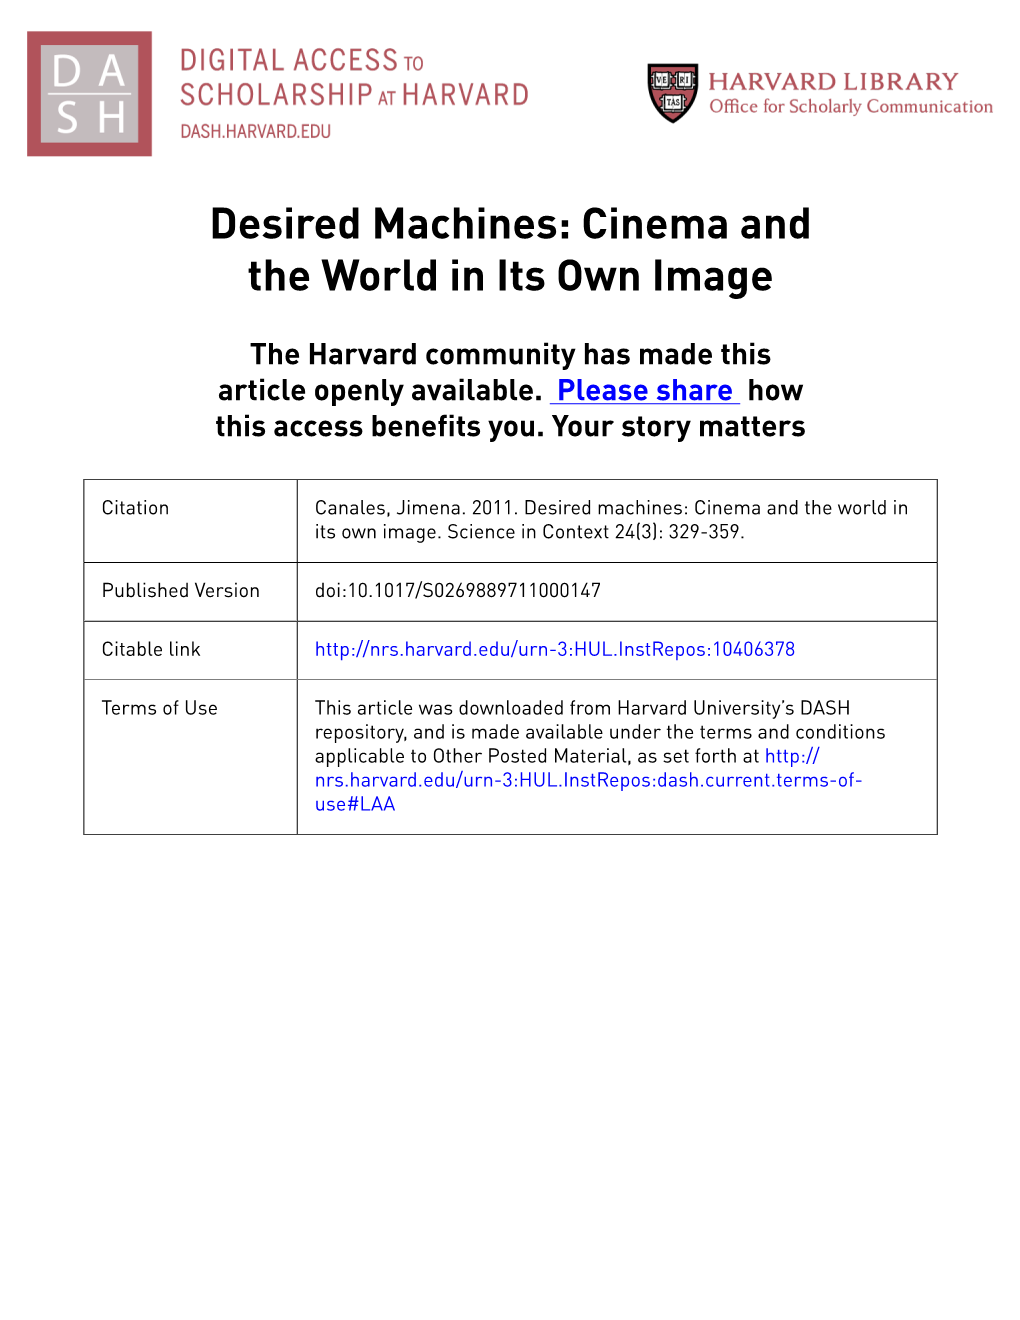 Desired Machines: Cinema and the World in Its Own Image